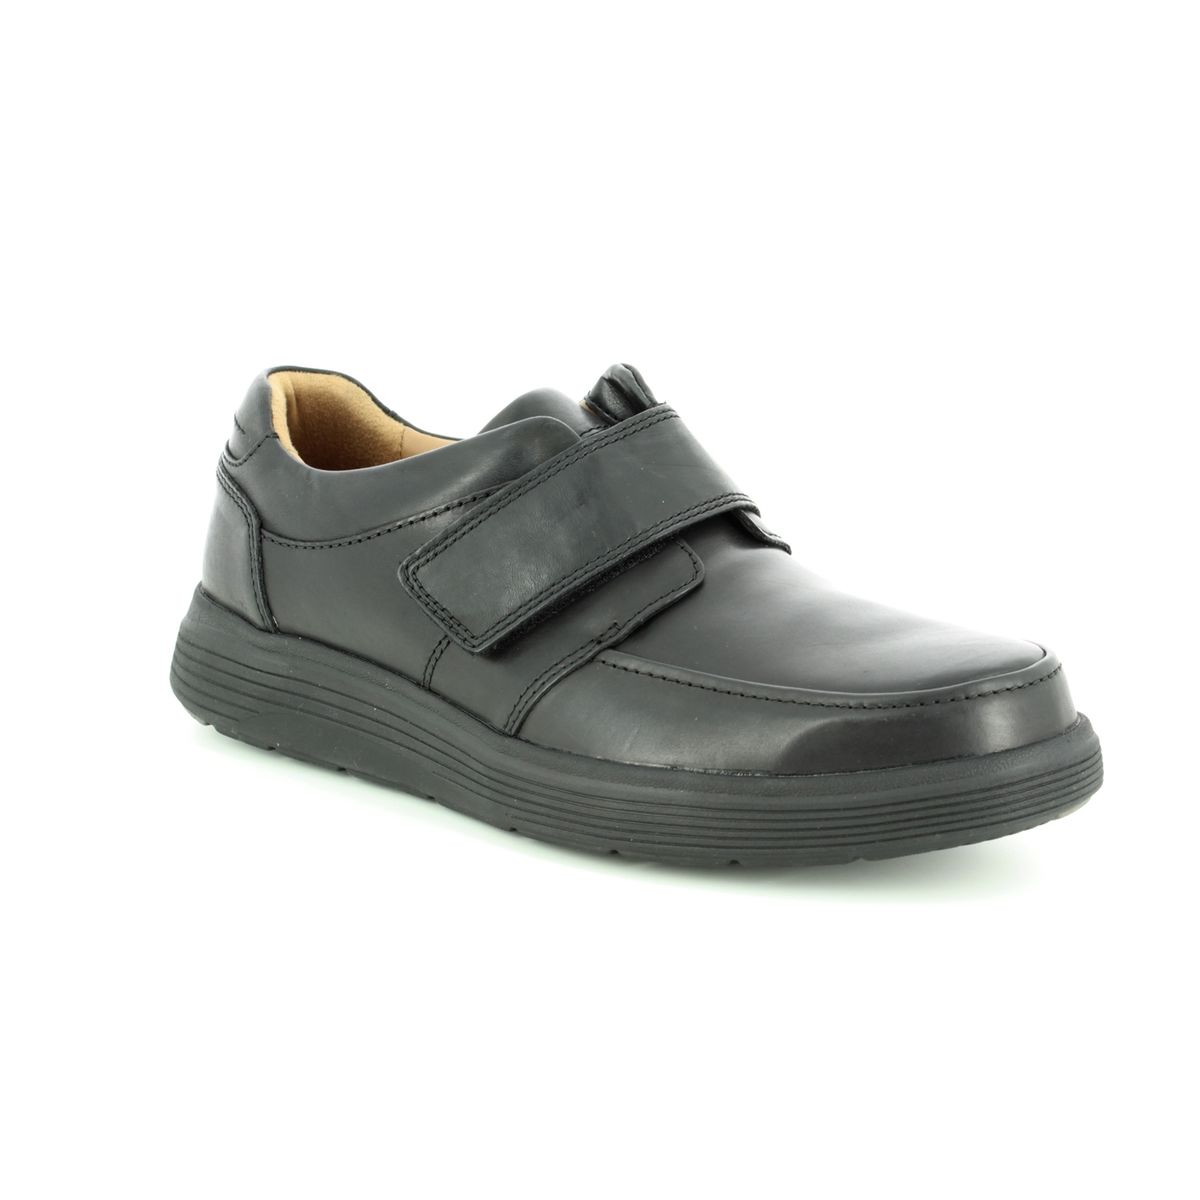 Clarks Un Abode Strap Black Leather Mens Comfort Shoes 3698-68H In Size 10.5 In Plain Black Leather H Width Fitting Extra Wide